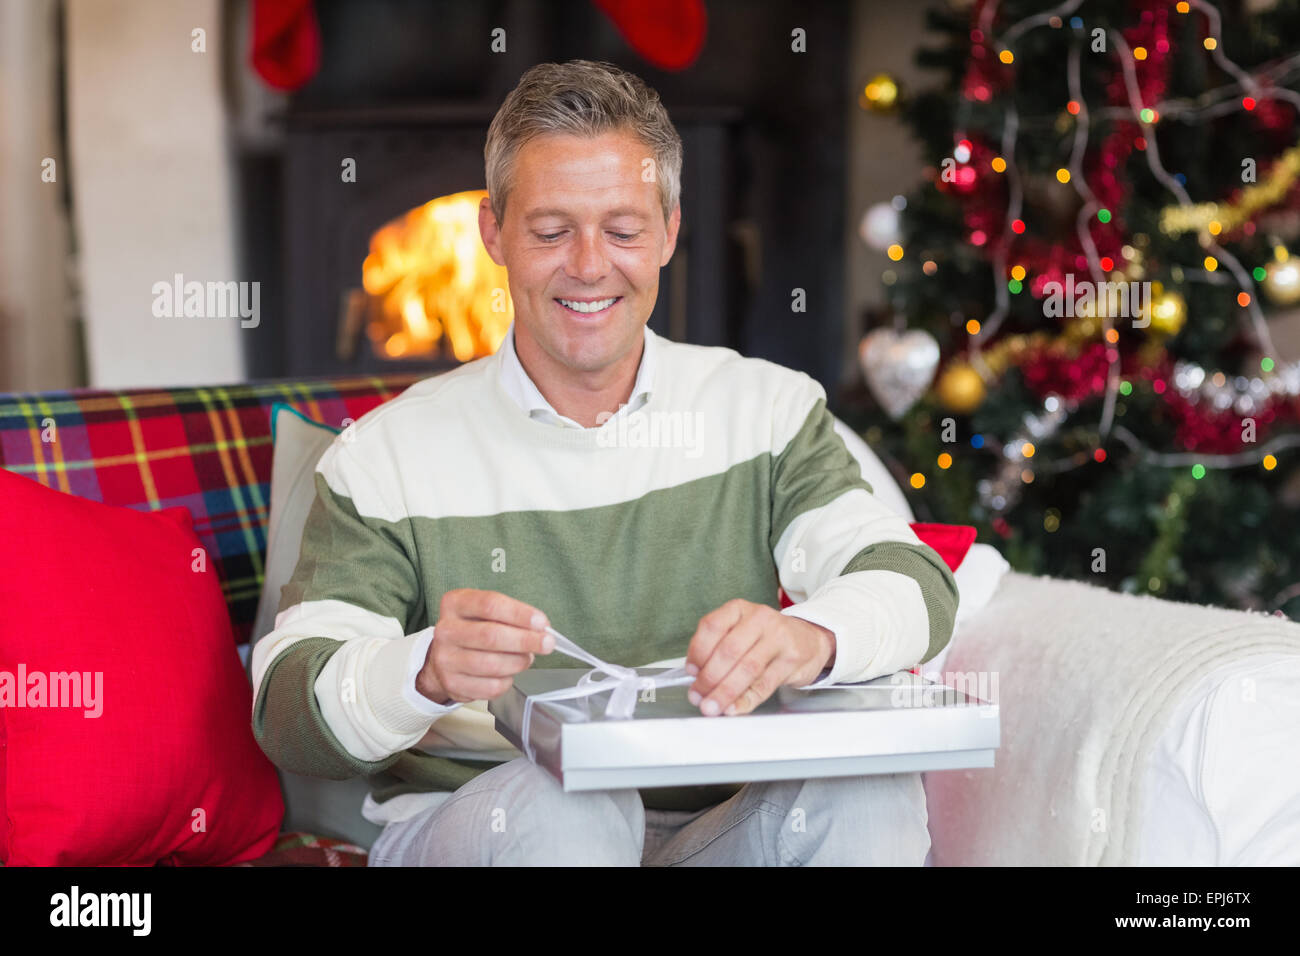 Man opening a gift on the couch at christmas Stock Photo